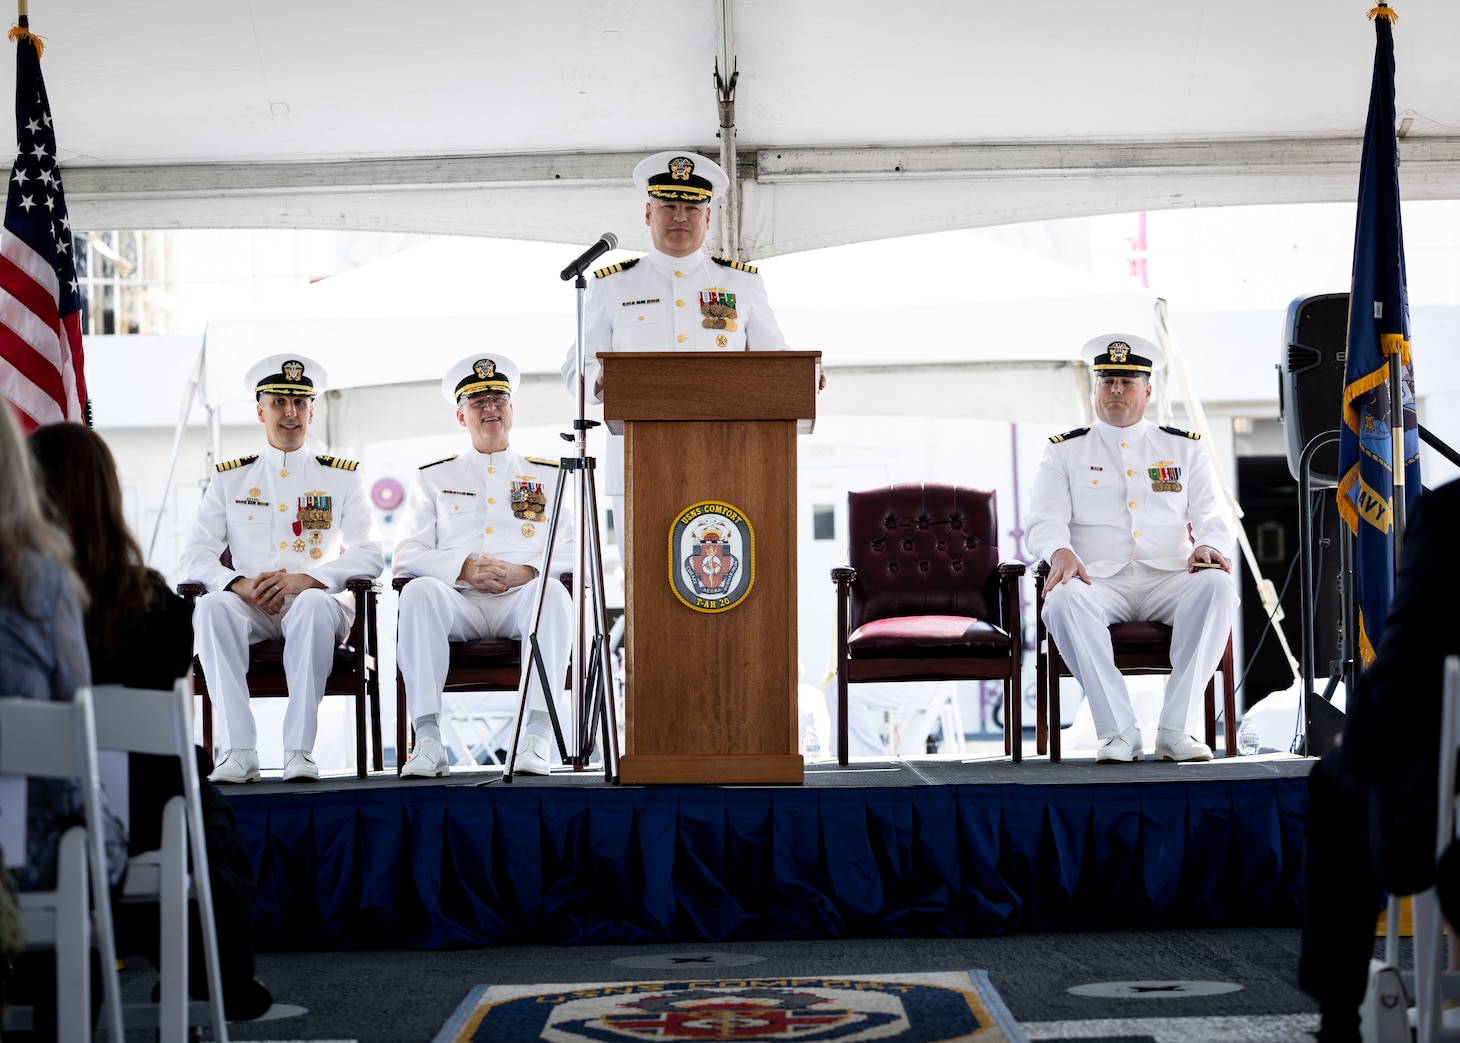 Military Sealift Command’s leadership in the Atlantic changed hands, when Navy Capt. James A. Murdock relieved Navy Capt. Daniel E. Broadhurst as commander of Norfolk-based Military Sealift Command Atlantic (MSC Atlantic) during a change of command ceremony held aboard Navy hospital ship USNS Comfort (T-AH-20) in Naval Station Norfolk April 13, 2023. Pictured above is U.S. Navy Captain James A. Murdock.